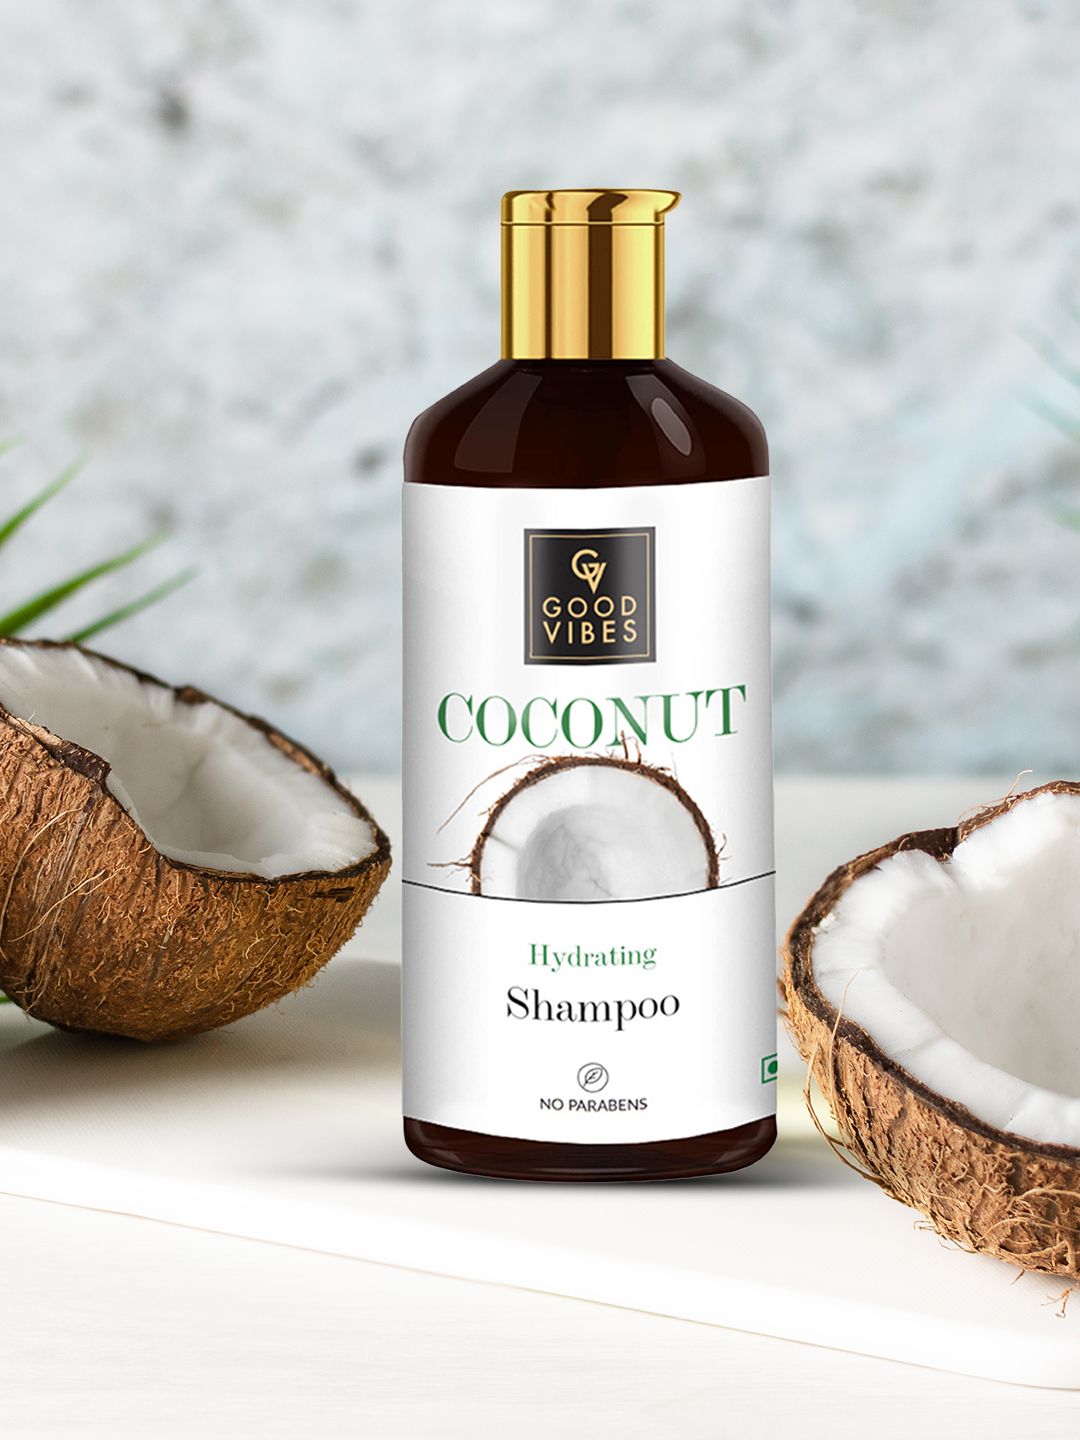 Good Vibes Coconut Hydrating Shampoo 300 ml Price in India